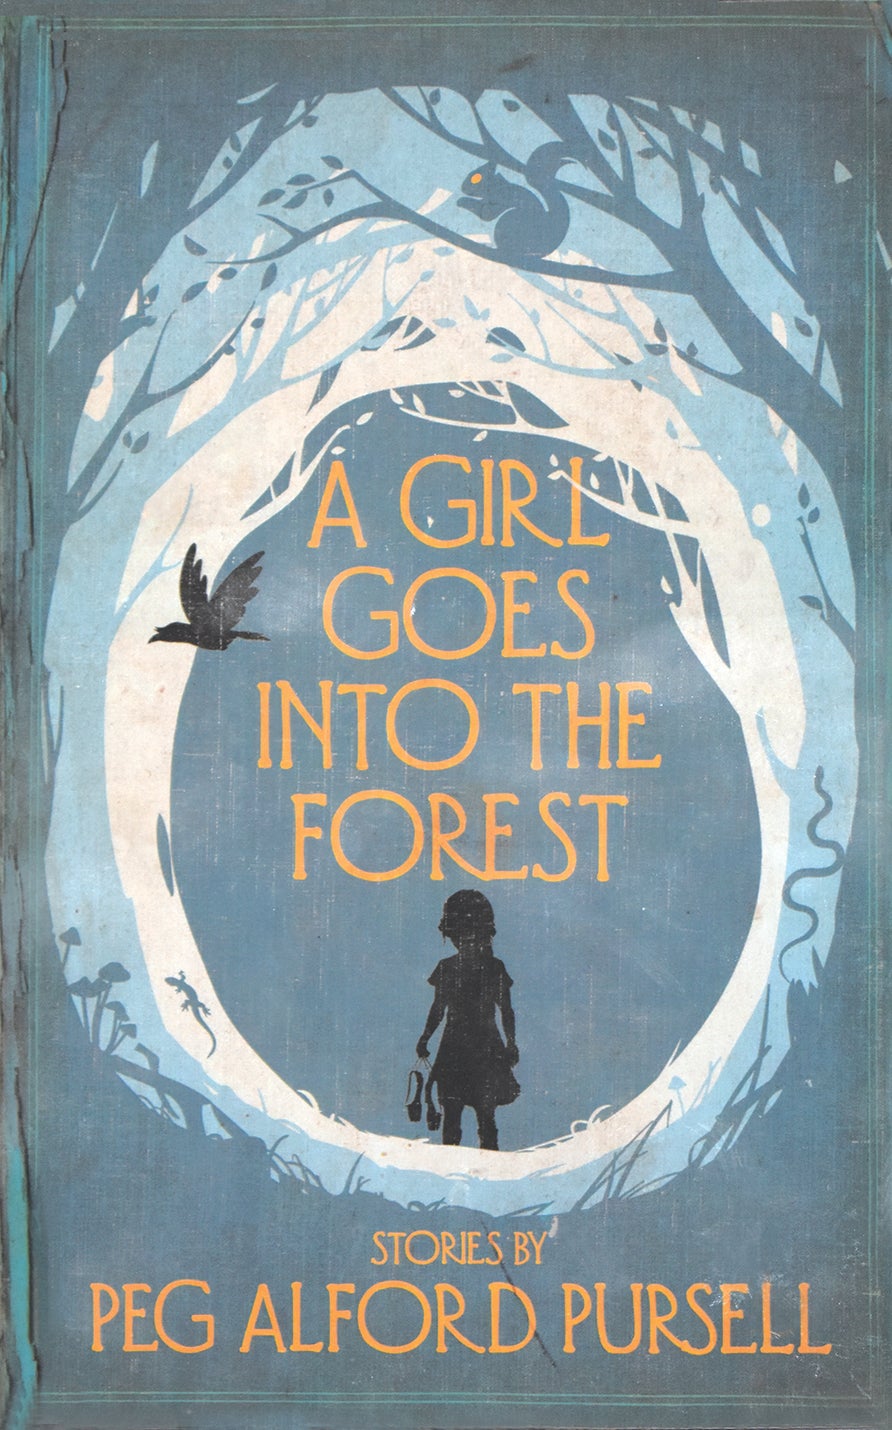 Cover of Peg Alford Pursell's book of short stories A Girl Goes into the Forest